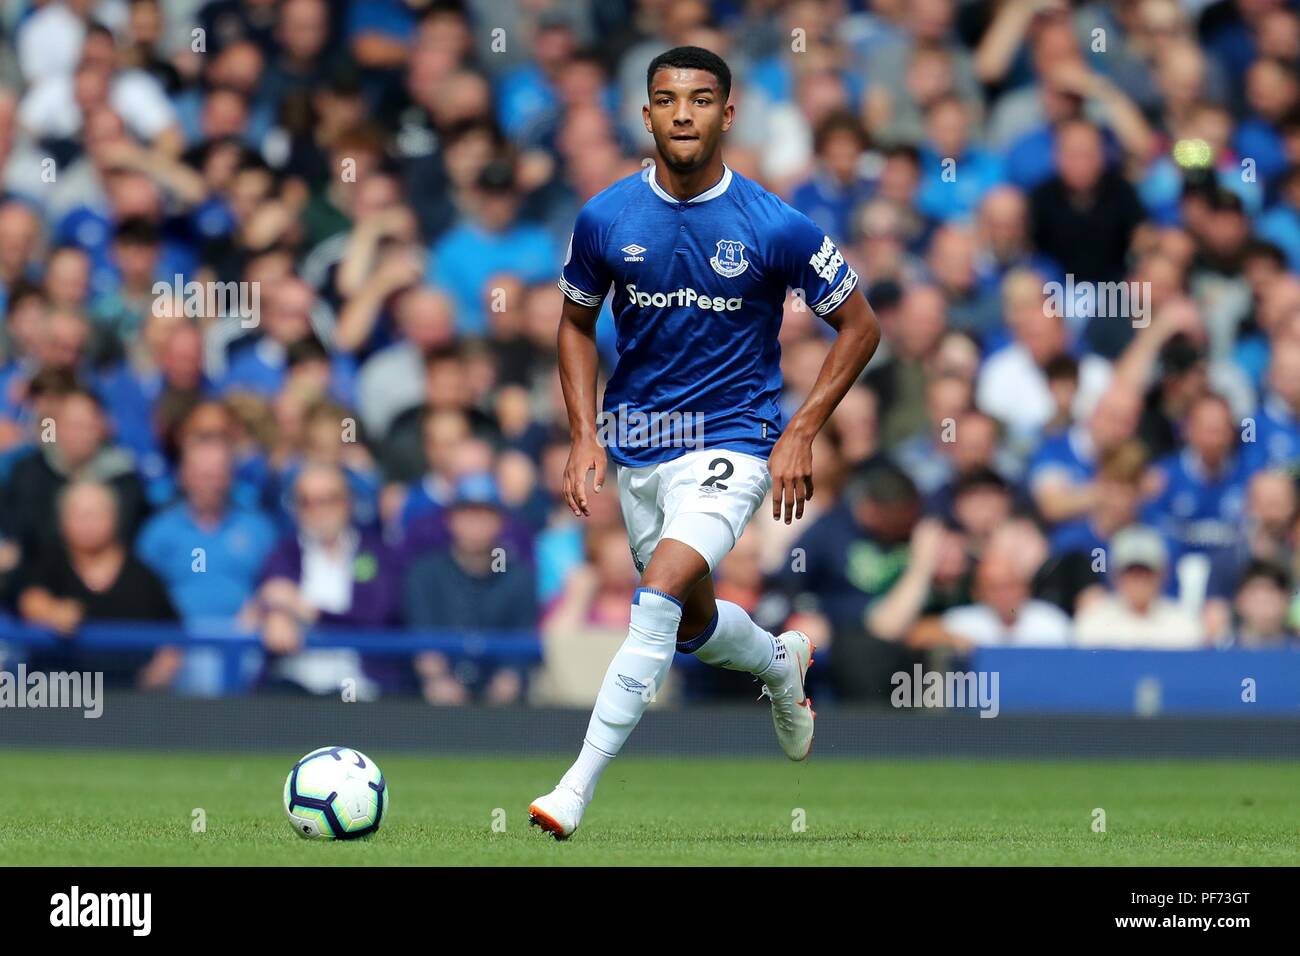 MASON HOLGATE EVERTON FC EVERTON FC V SOUTHAMPTON FC, PREMIER LEAGUE GOODISON PARK, EVERTON, ENGLAND 18 August 2018 GBC10979 STRICTLY EDITORIAL USE ONLY. If The Player/Players Depicted In This Image Is/Are Playing For An English Club Or The England National Team. Then This Image May Only Be Used For Editorial Purposes. No Commercial Use. The Following Usages Are Also Restricted EVEN IF IN AN EDITORIAL CONTEXT: Use in conjuction with, or part of, any unauthorized audio, video, data, fixture lists, club/league logos, Betting, Games or any 'live' services. Also Restricted Ar Stock Photo